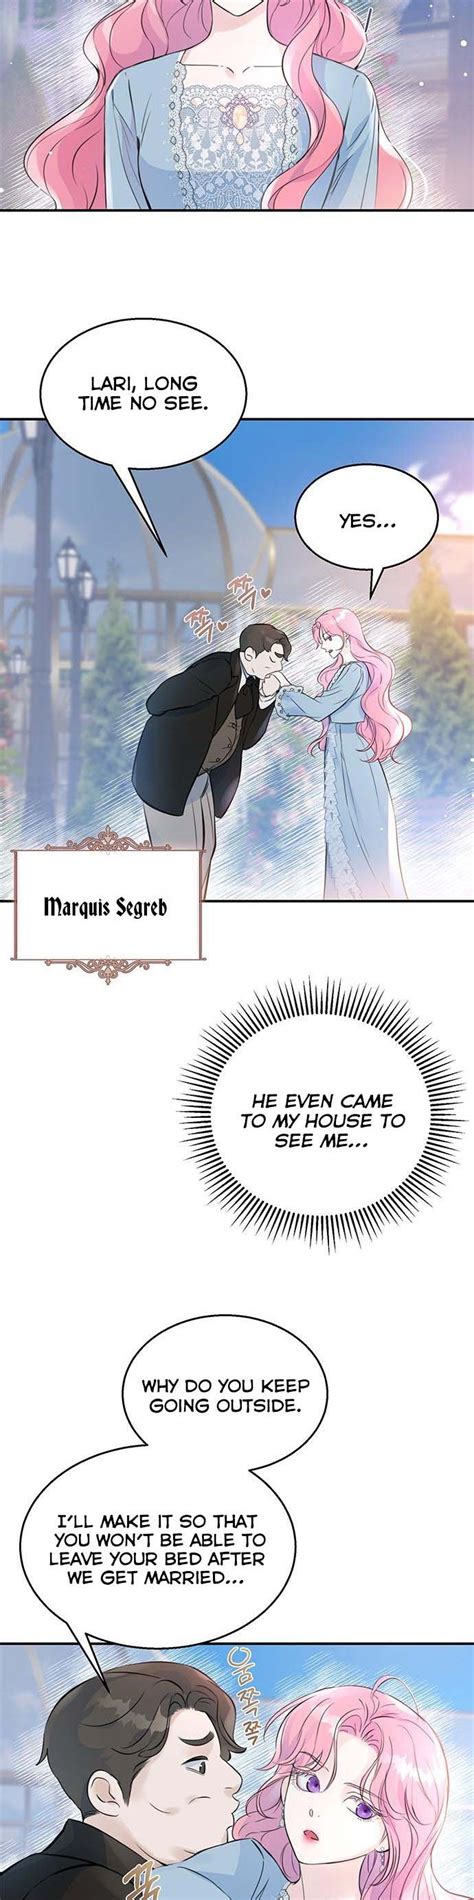 I thought i didnt have long to live spoilers. The President Is Too Hard To Deal With. 10/03/2023. I Thought I Didn’t Have Long To Live!. Chapter 40. Read manhwa I Thought I Didn’t Have Long To Live! / Time Limit / I Thought It Was Time! Lariette, princess of the Blanchett family, who was diagnosed with the dis. 